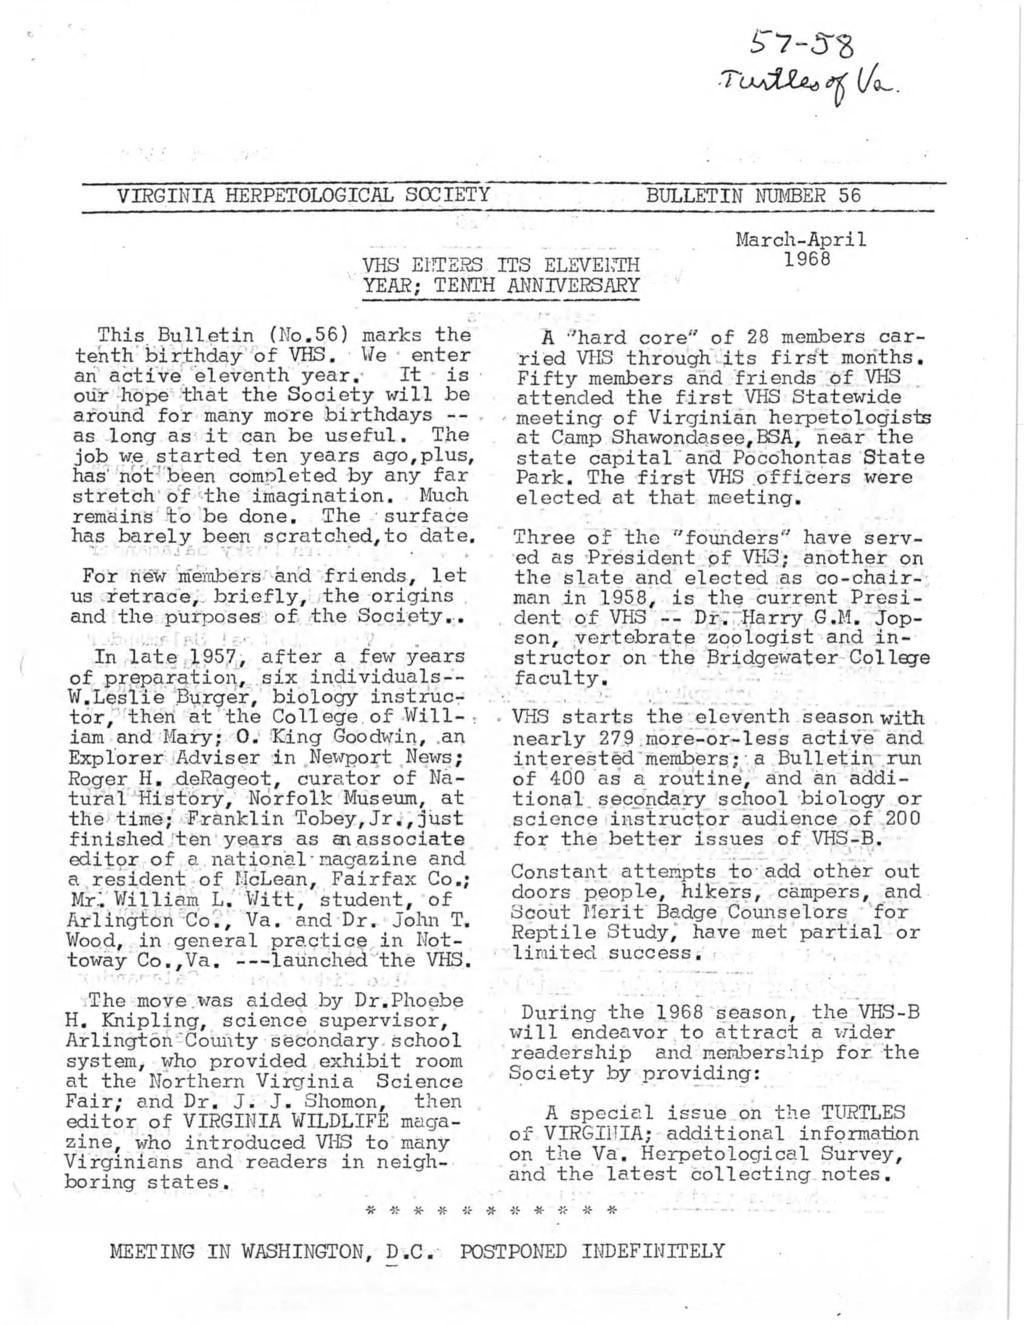 I S i - 5 % 'LksrfJjLa it (/L. VIRGINIA HERPETOLOGICAL SOCIETY BULLETIN NUMBER 56 March-April VHS ENTERS ITS ELEVENTH 1968 YEAS; TENTH ANNIVERSARY This Bulletin (No.